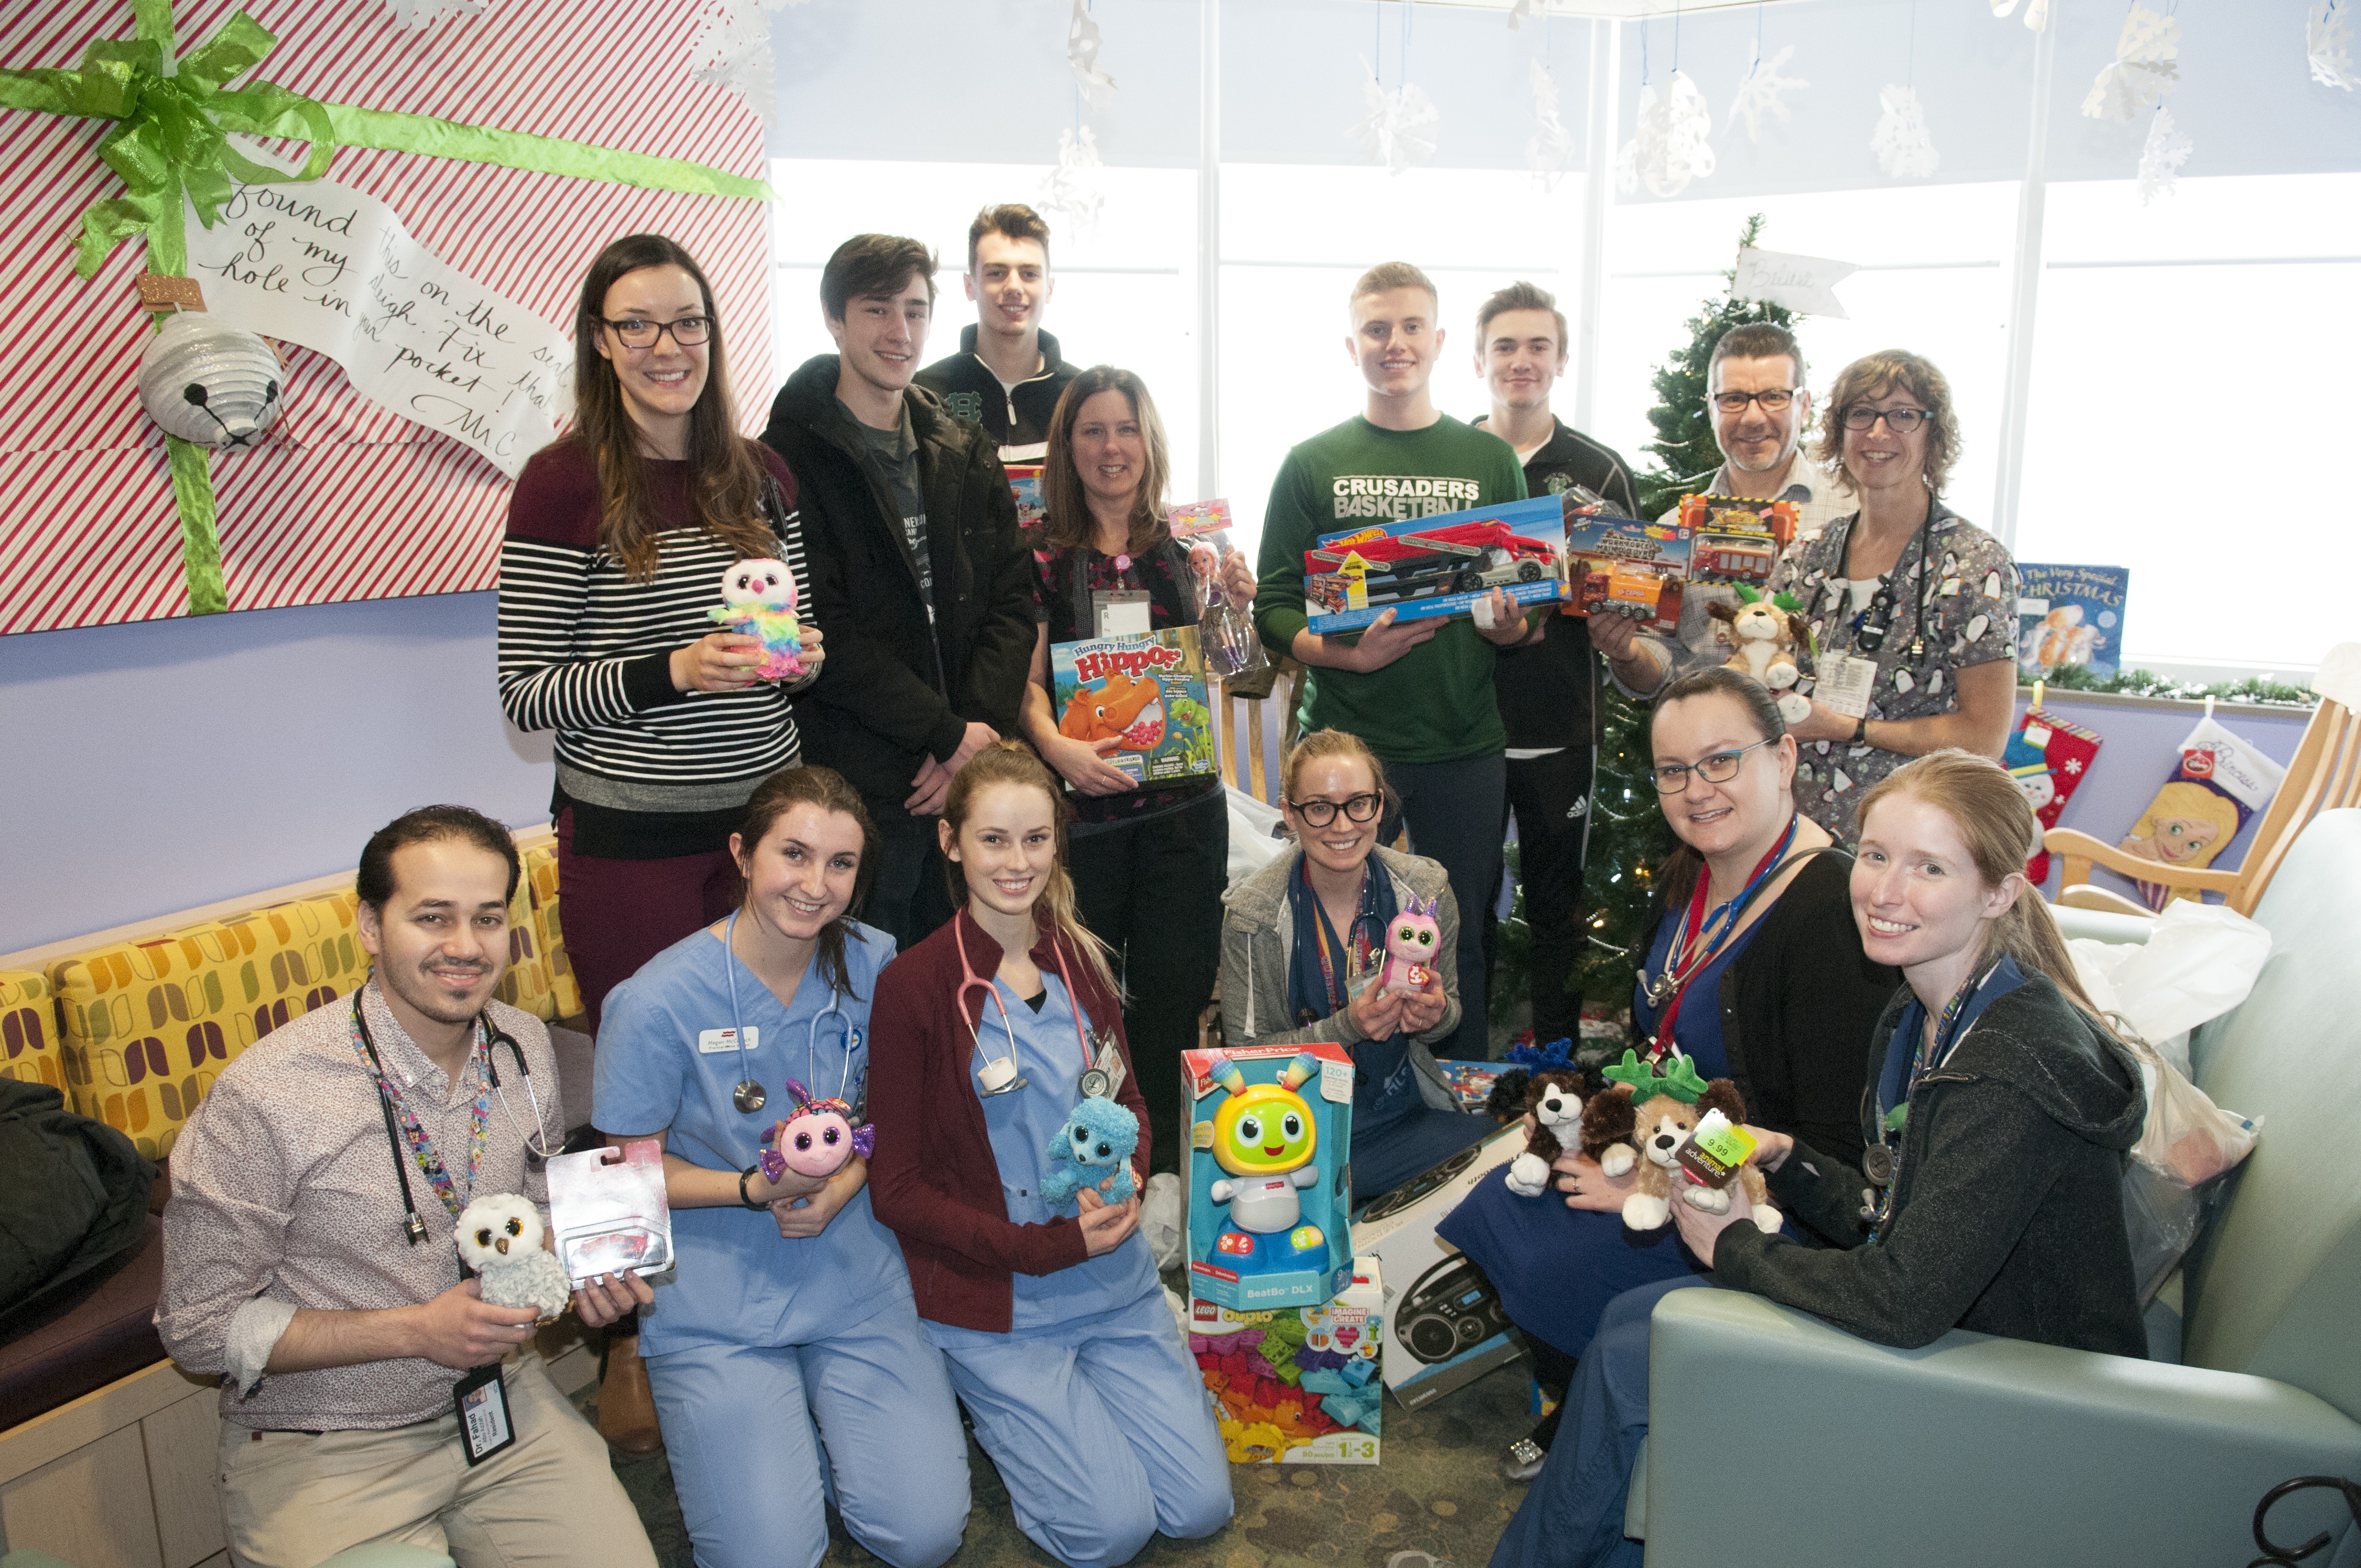 Members of the Holy Cross senior boys basketball team donate toys to pediatric patients this Christmas